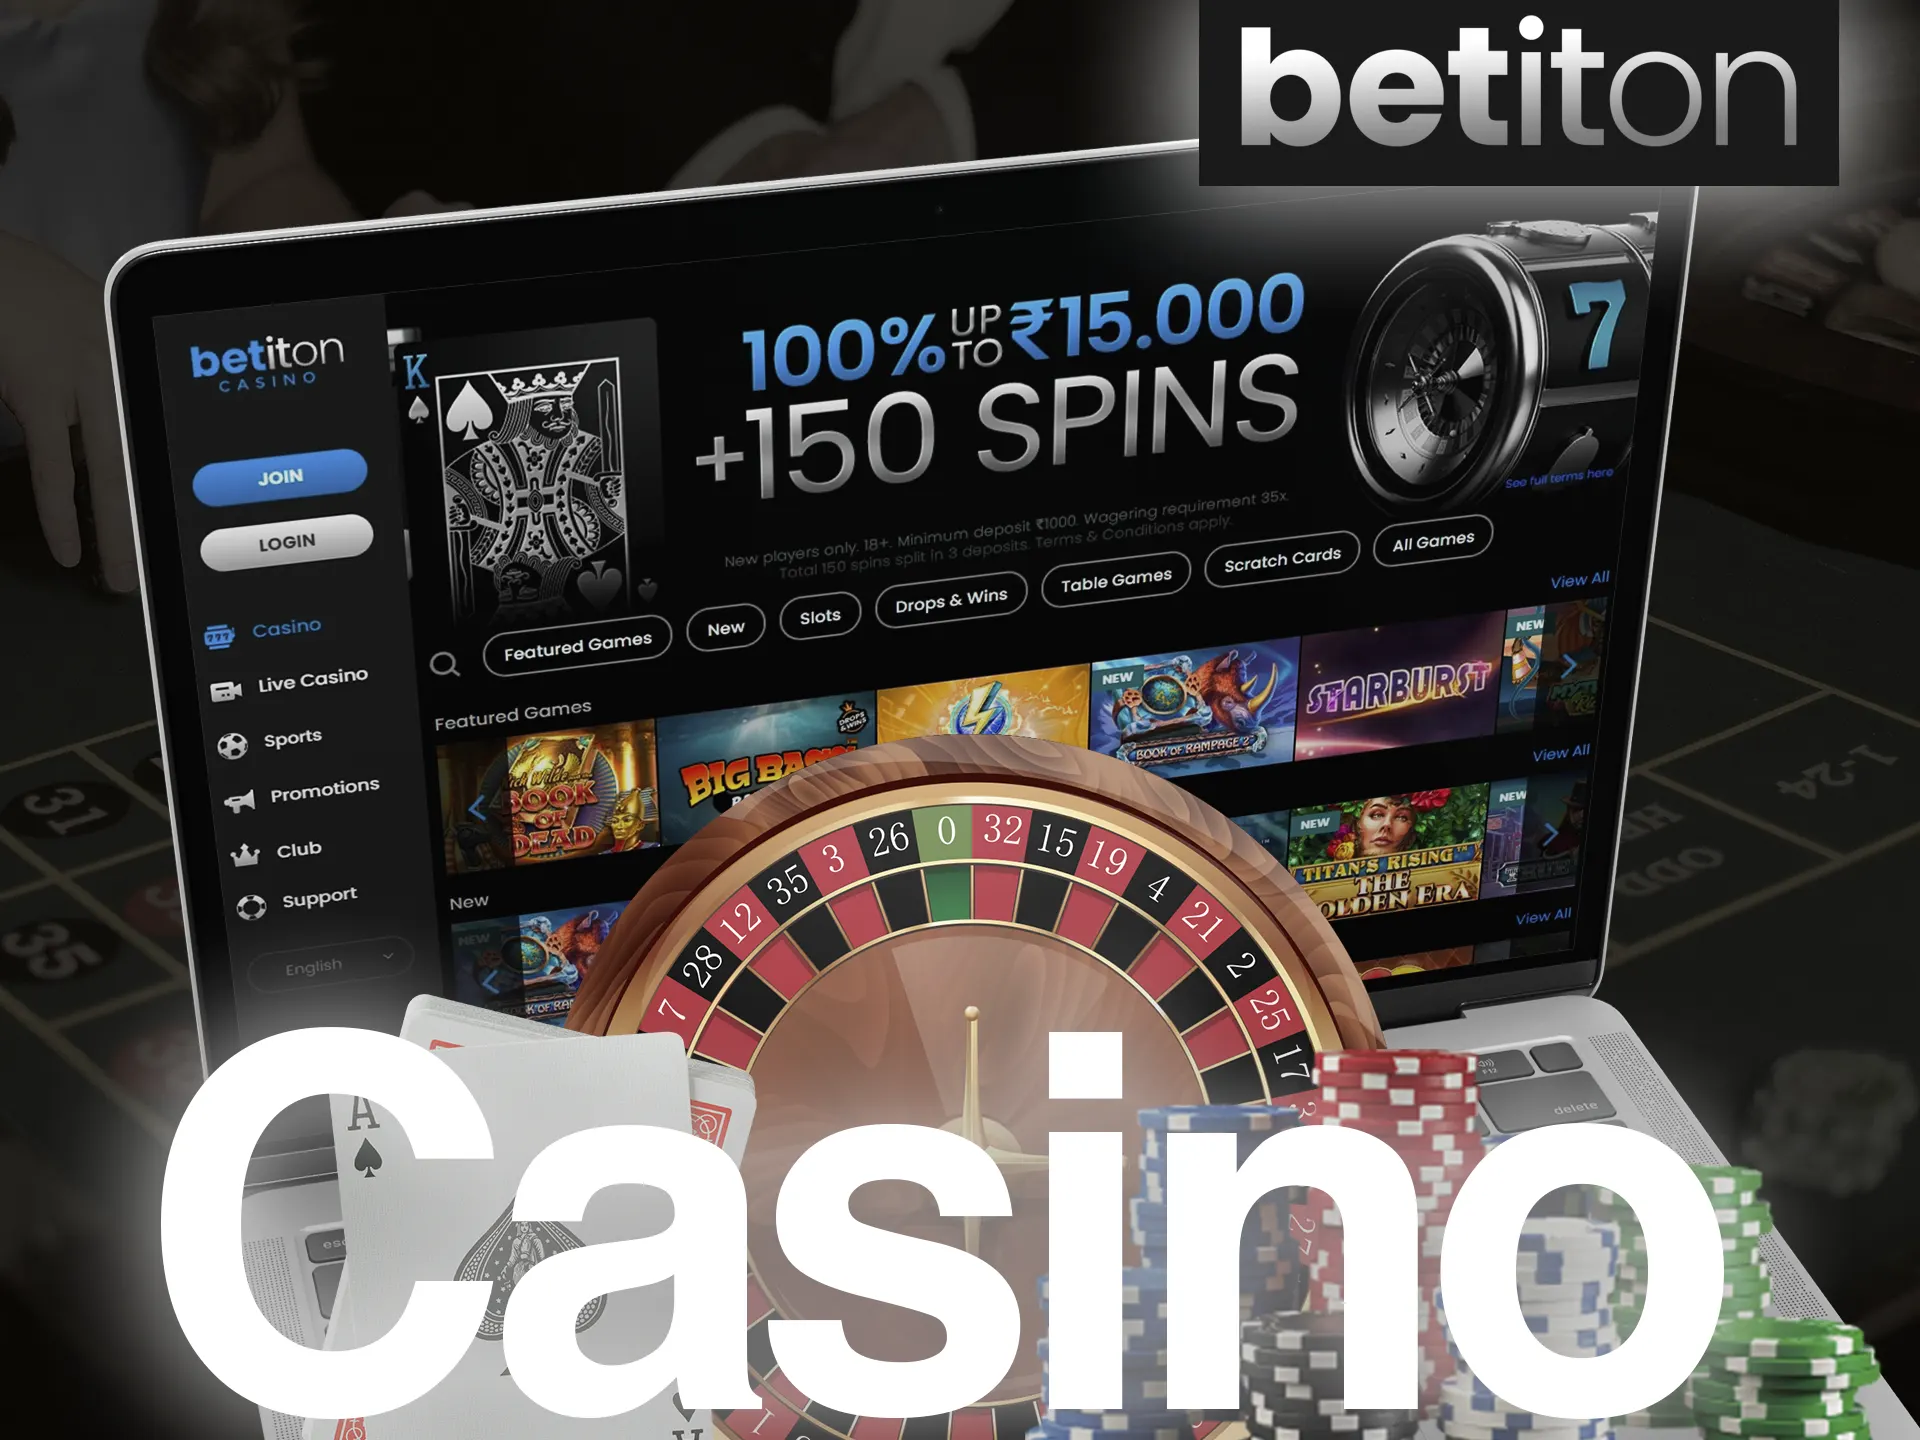 Win money by playing at the Betiton casino.